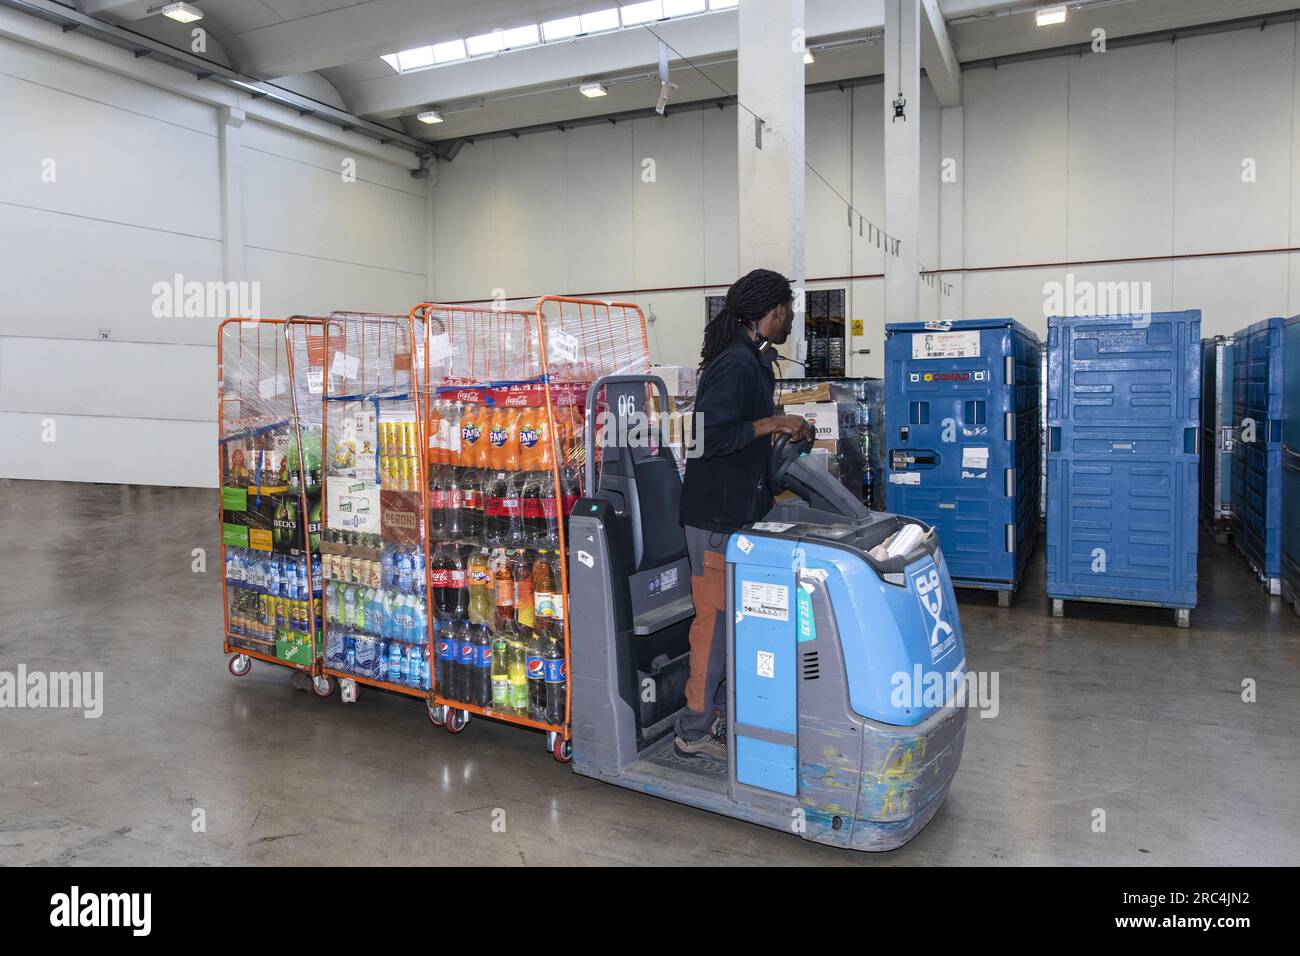 worker on the forklift that loads and distributes the food for the supermarkets Stock Photo